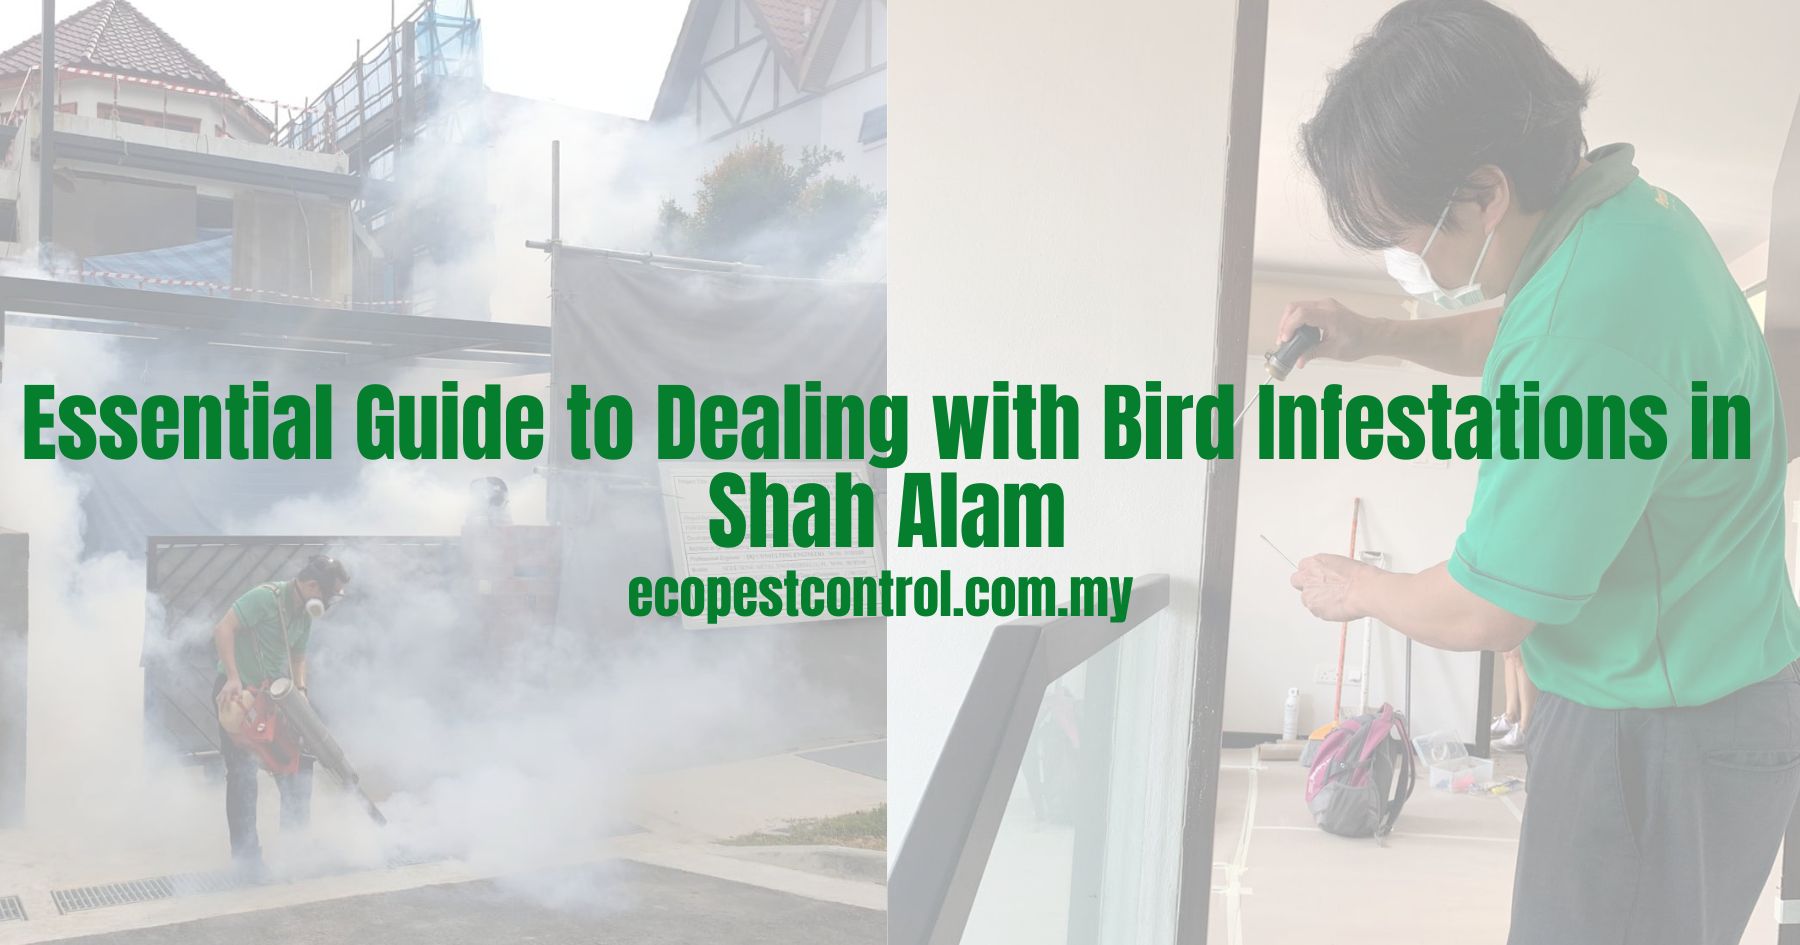 Essential Guide to Dealing with Bird Infestations in Shah Alam